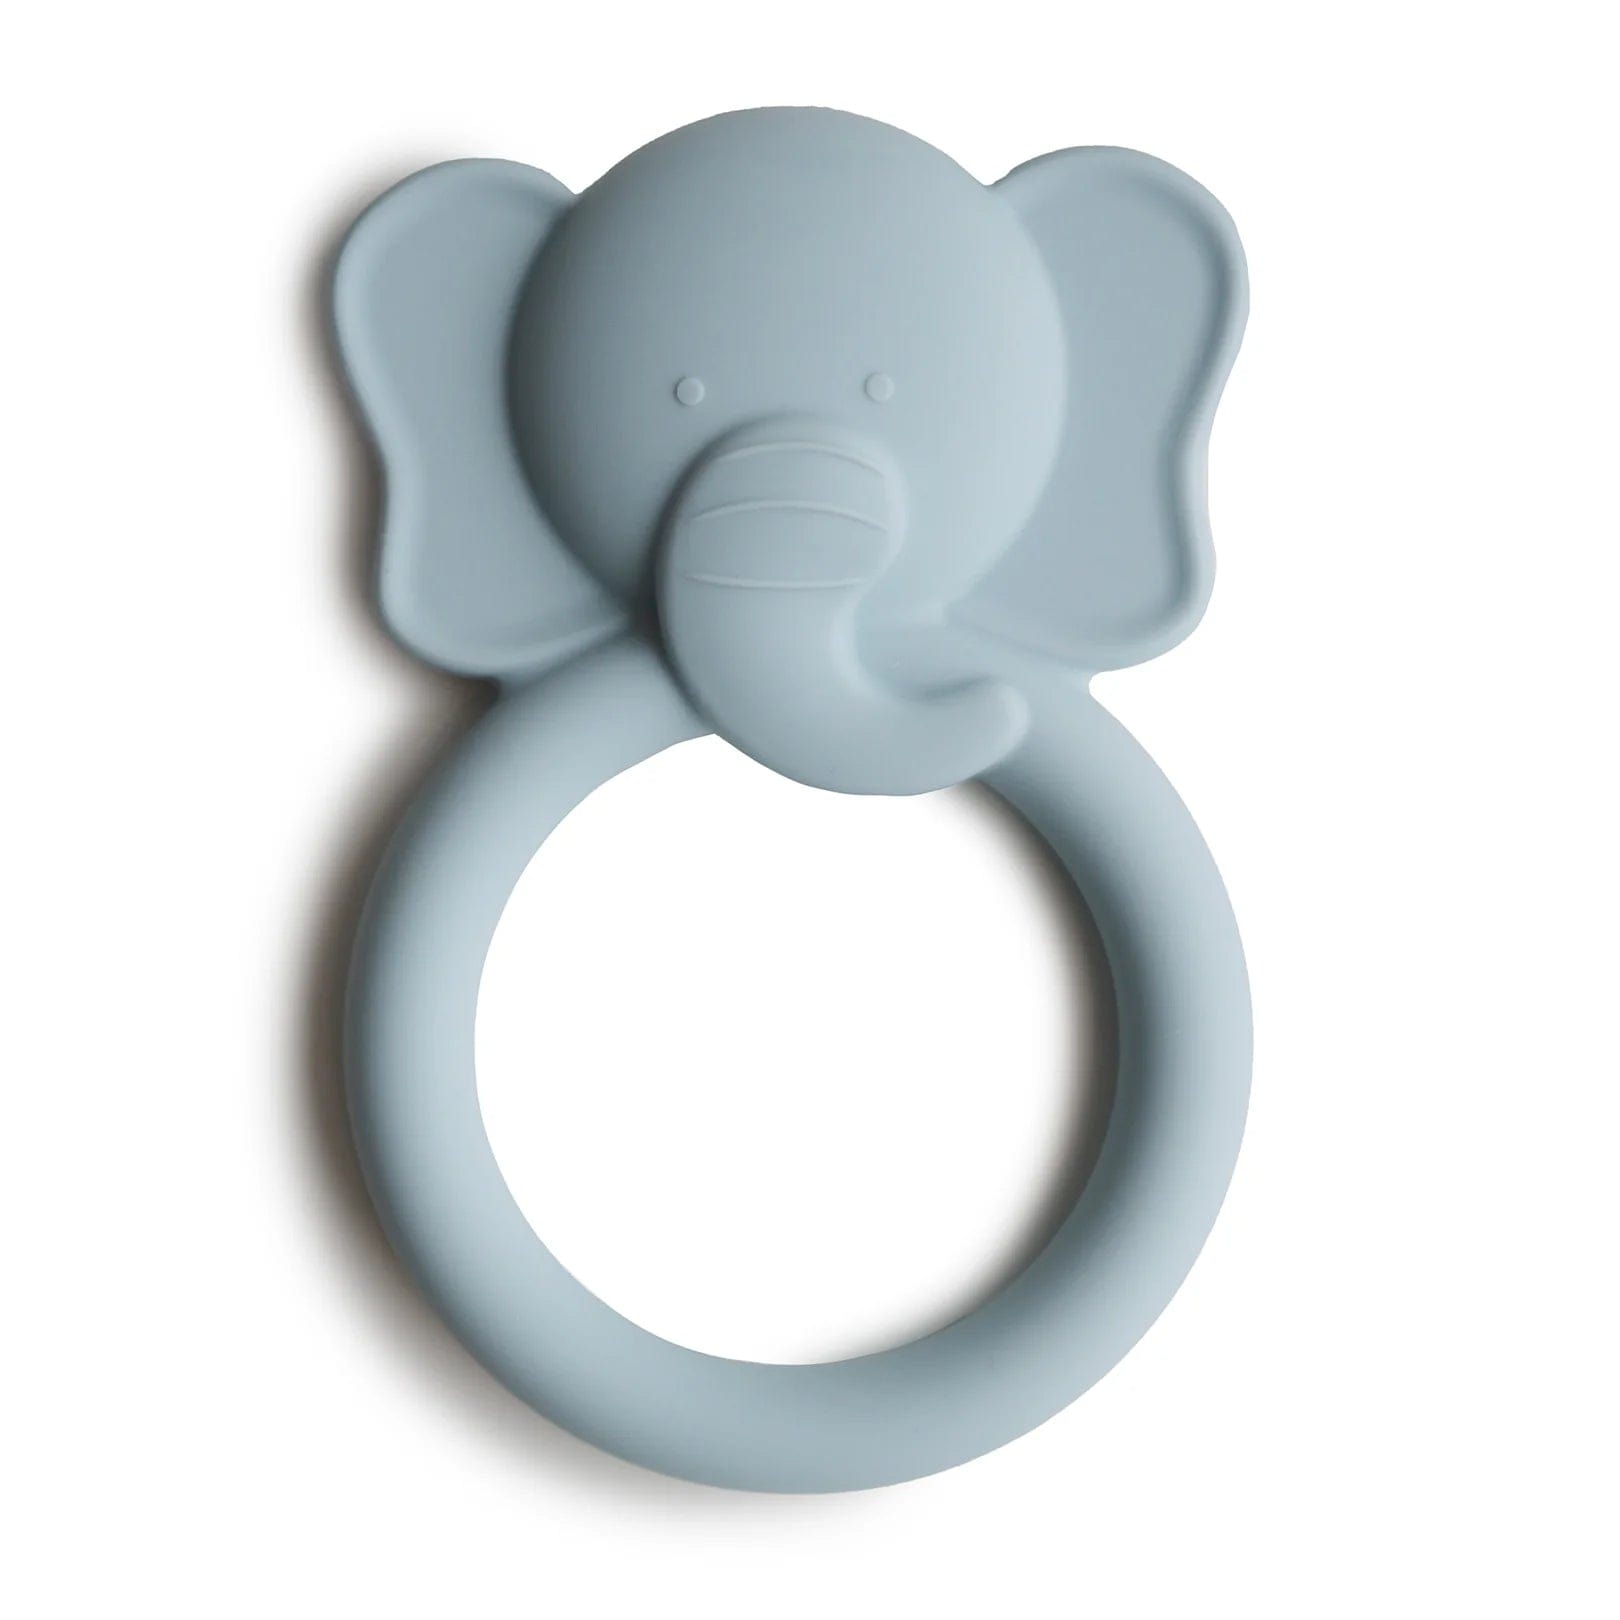 Mushie Soother (Cloud) Mushie Elephant Teether (Cloud)